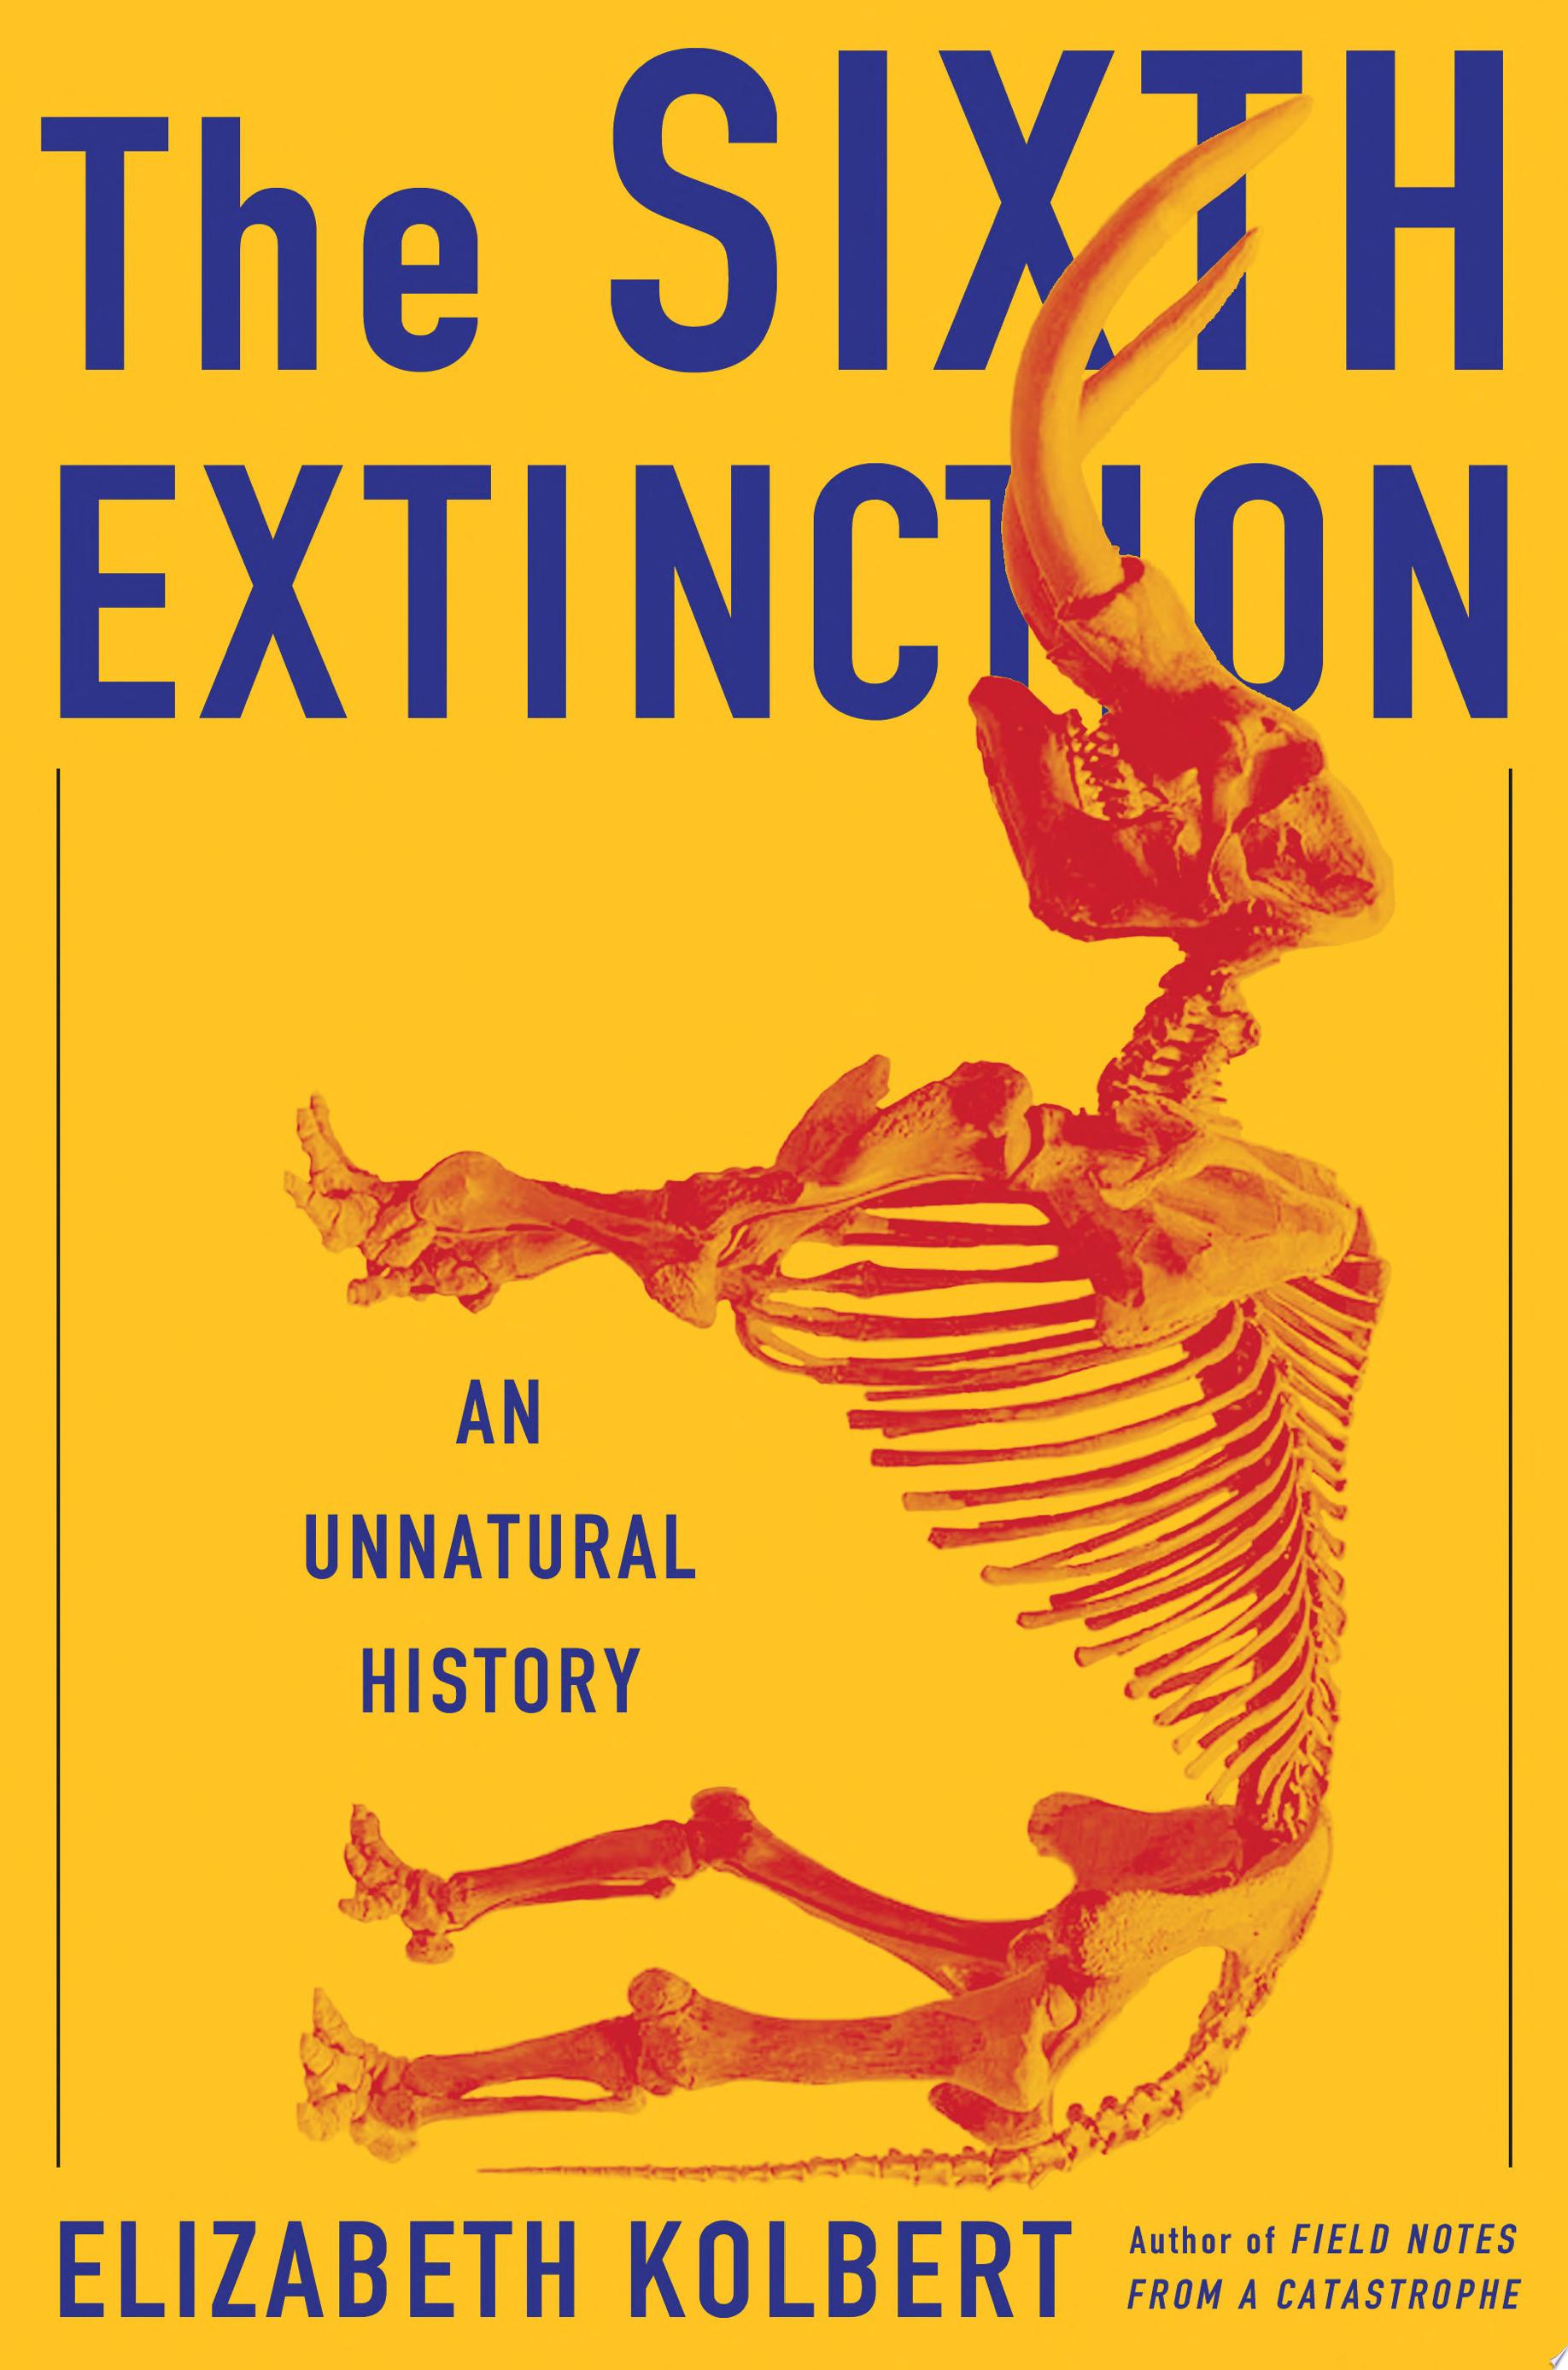 Image for "The Sixth Extinction"